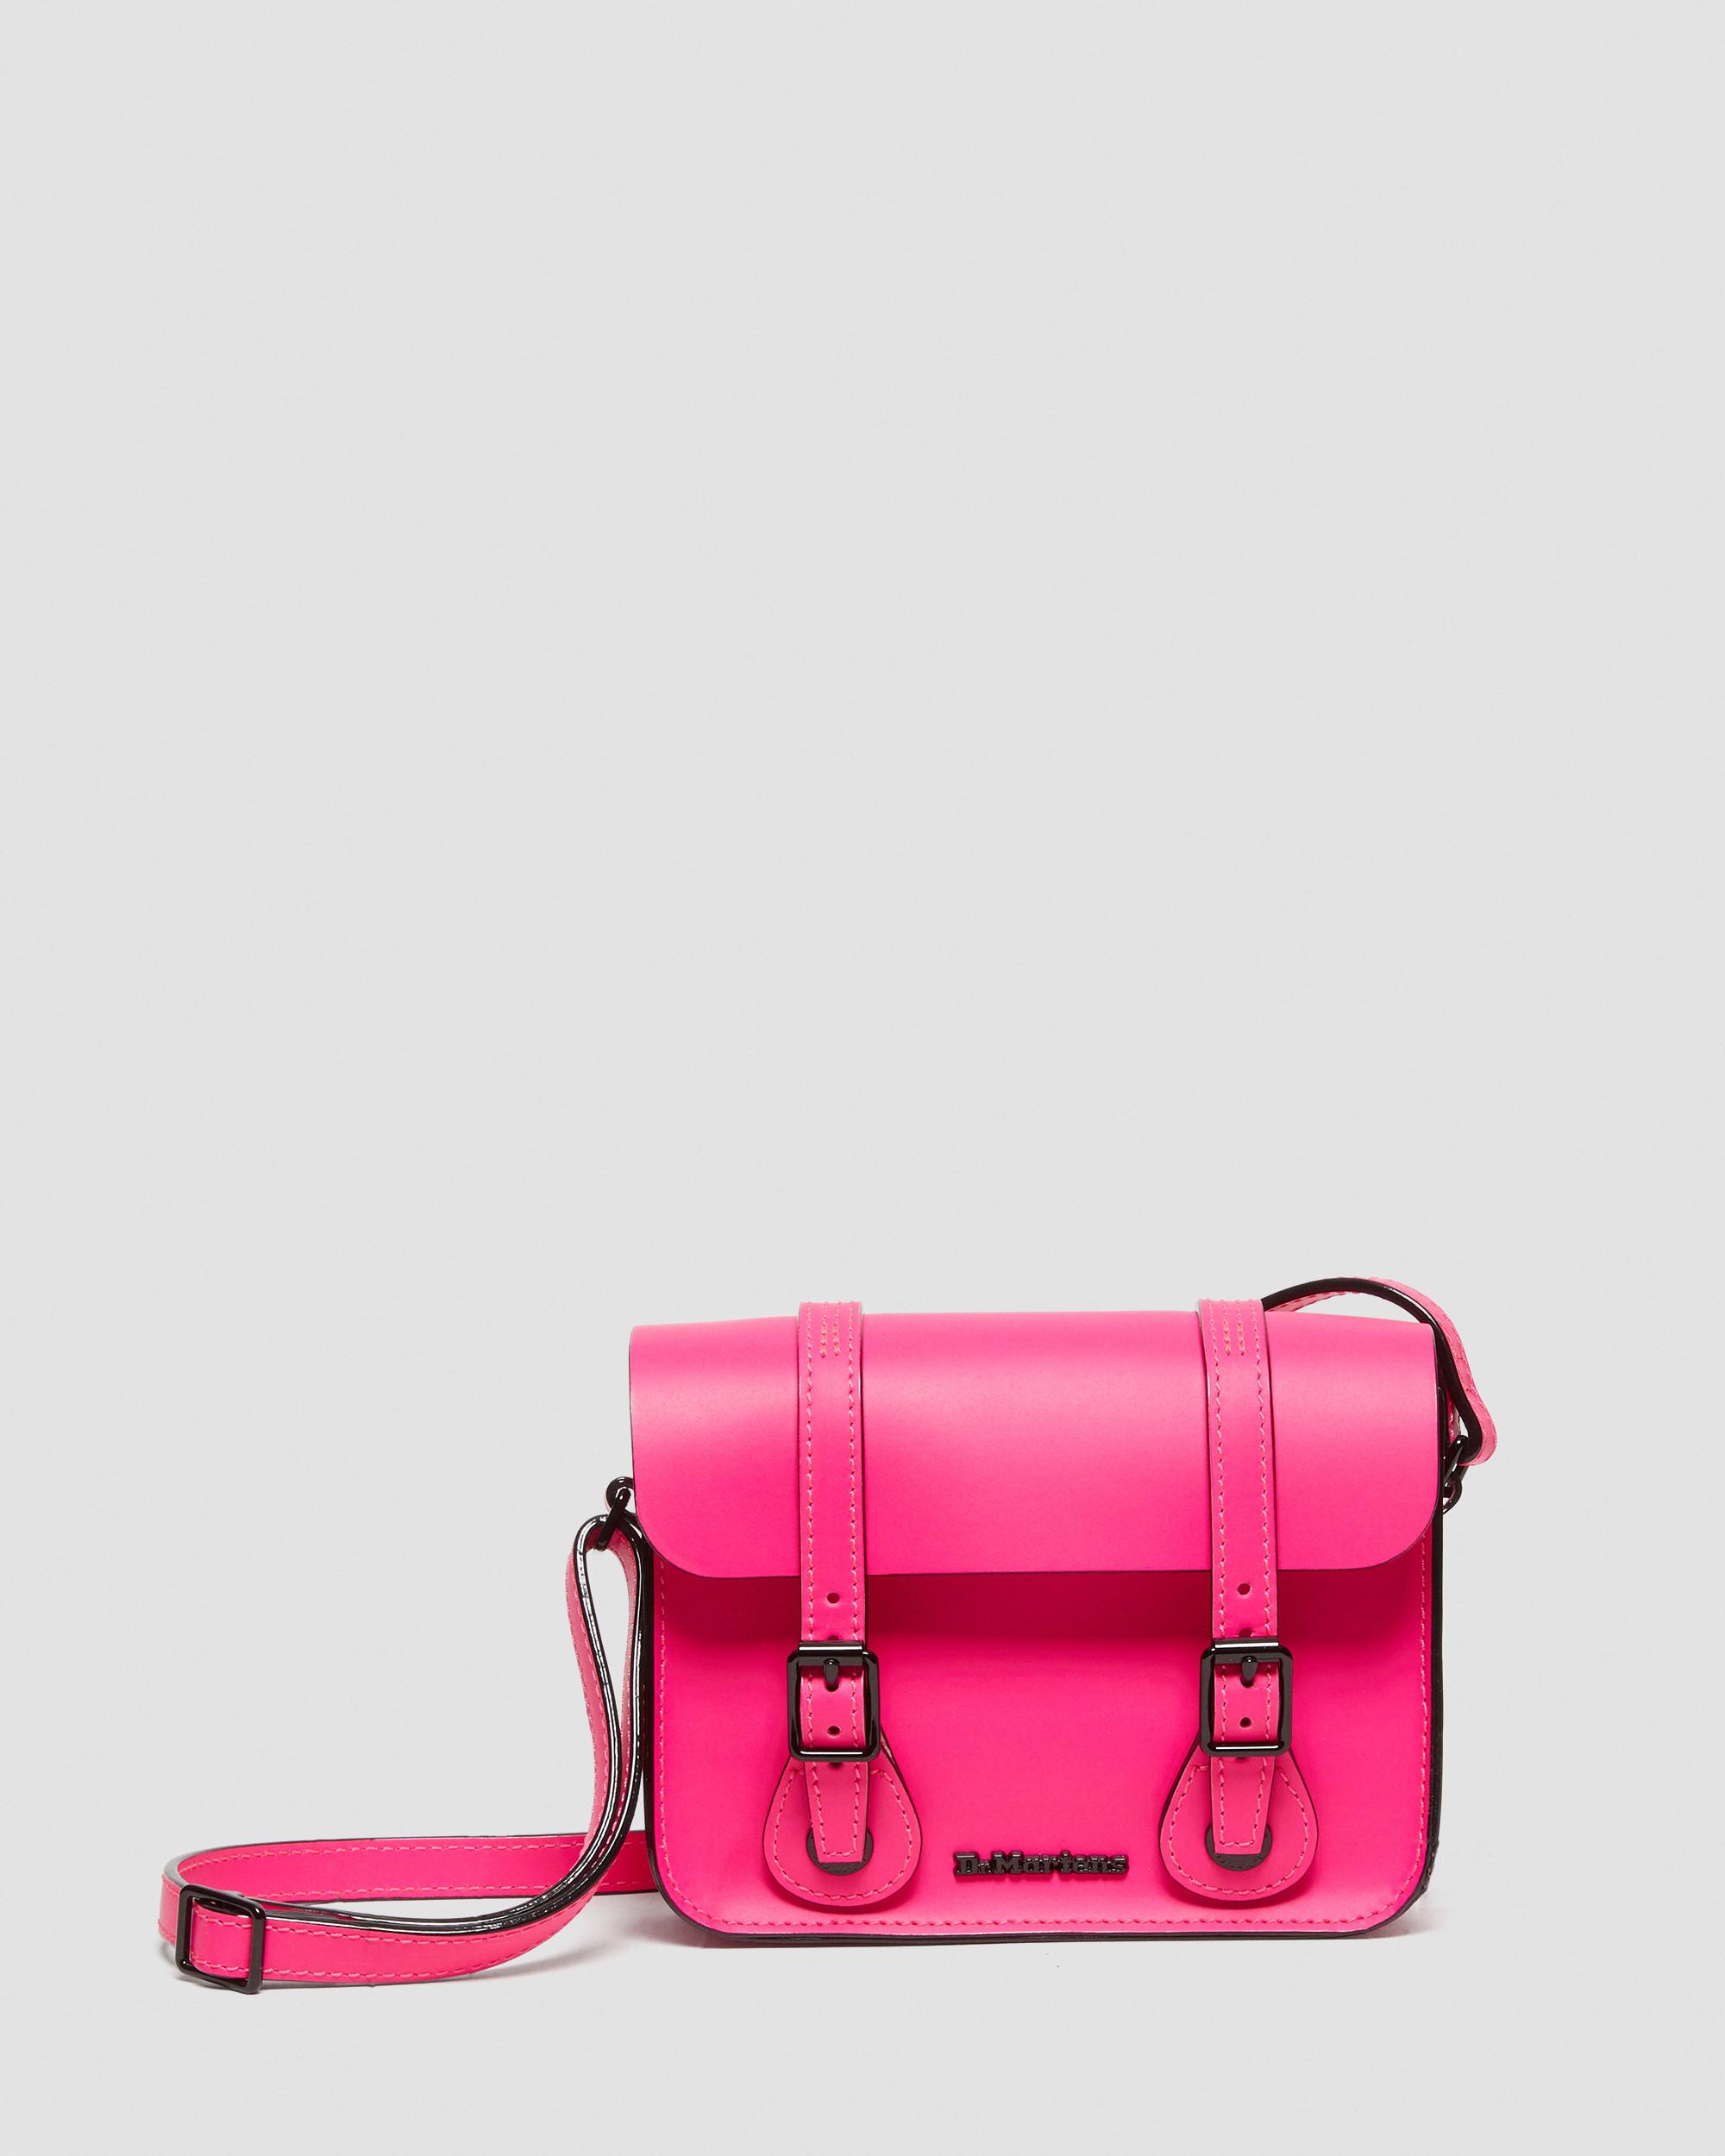 Dr. Martens, Bags, Dr Martens Kiev Cherry Red Leather Zip Wallet